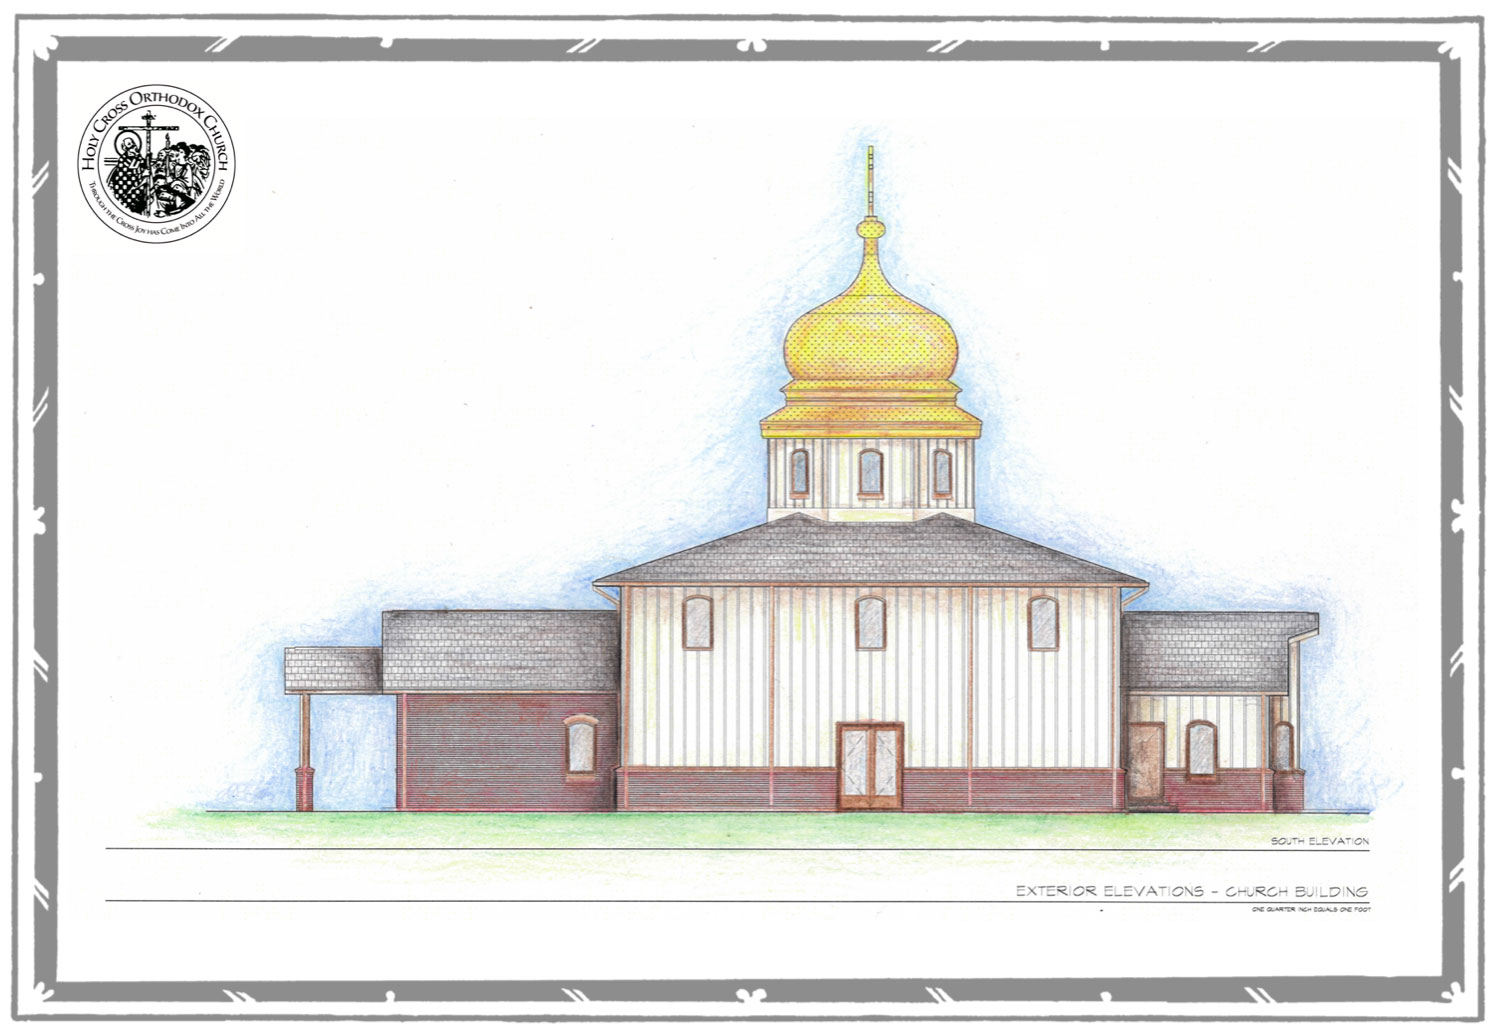 Father Christopher's colored image of the church.